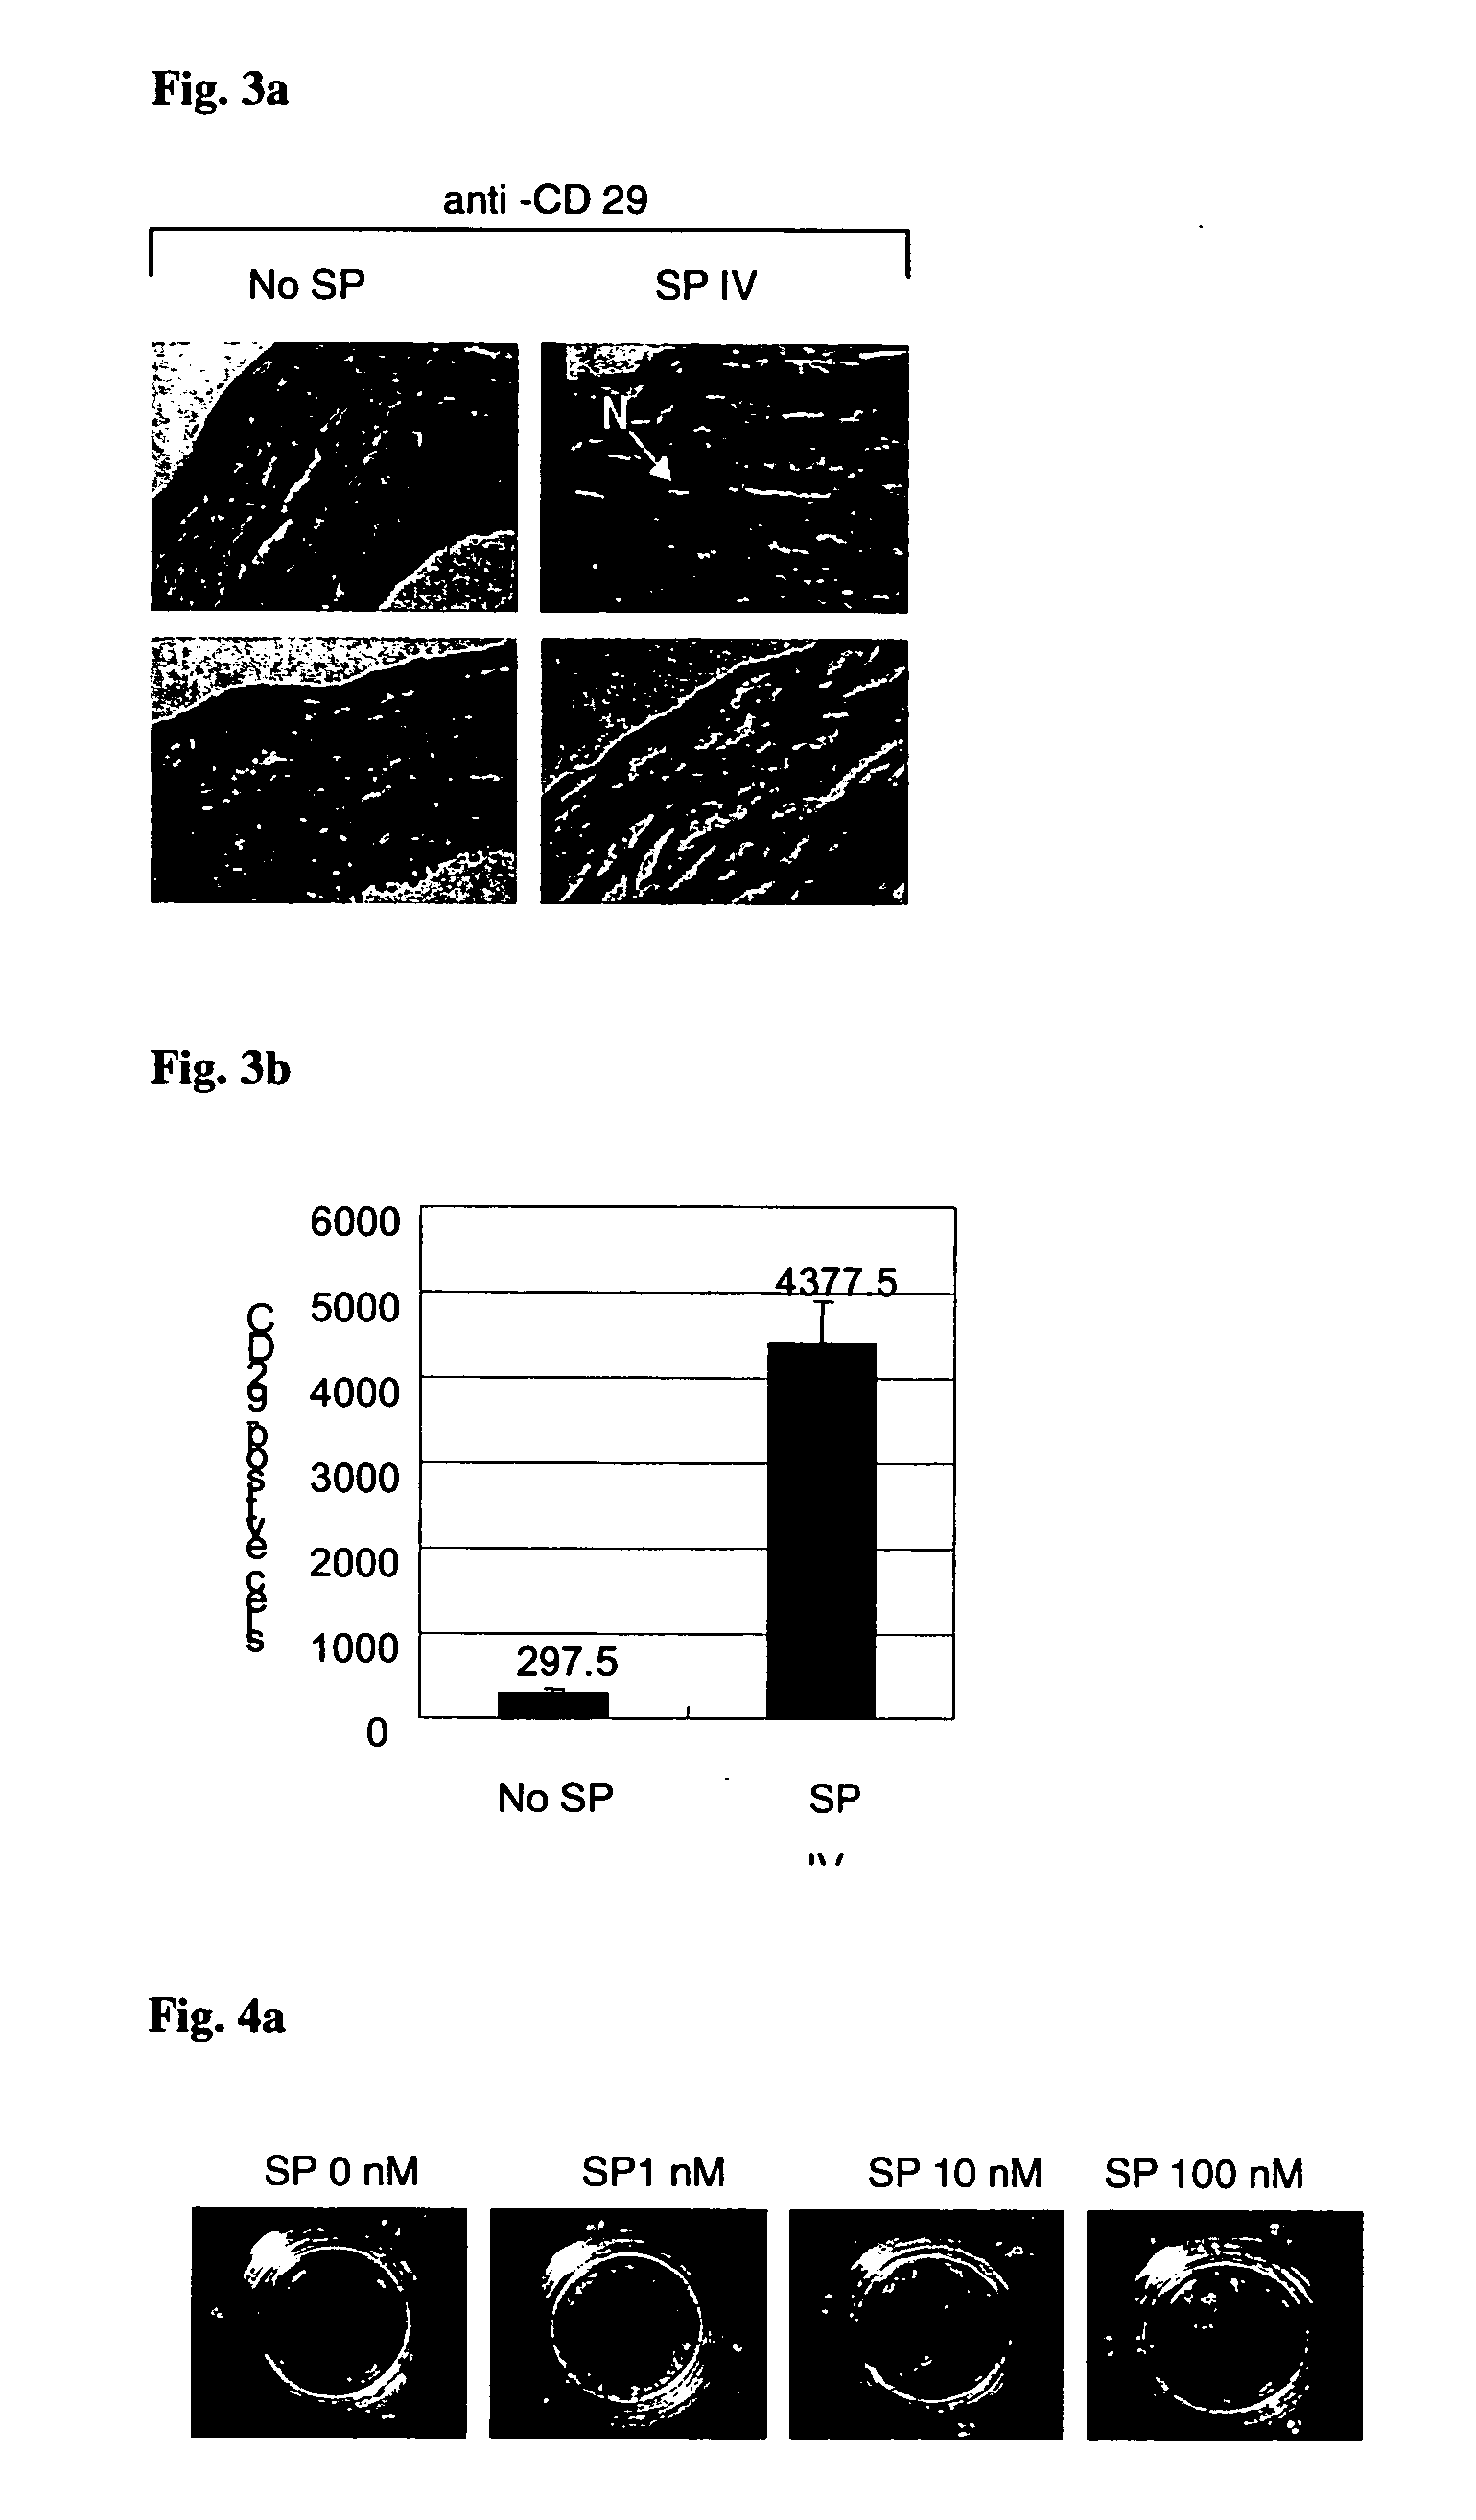 Use of substance P for mobilization of Mesenchymal stem cells or proliferation of Mesenchymal stem cells and for wound healing or facilitating wound healing